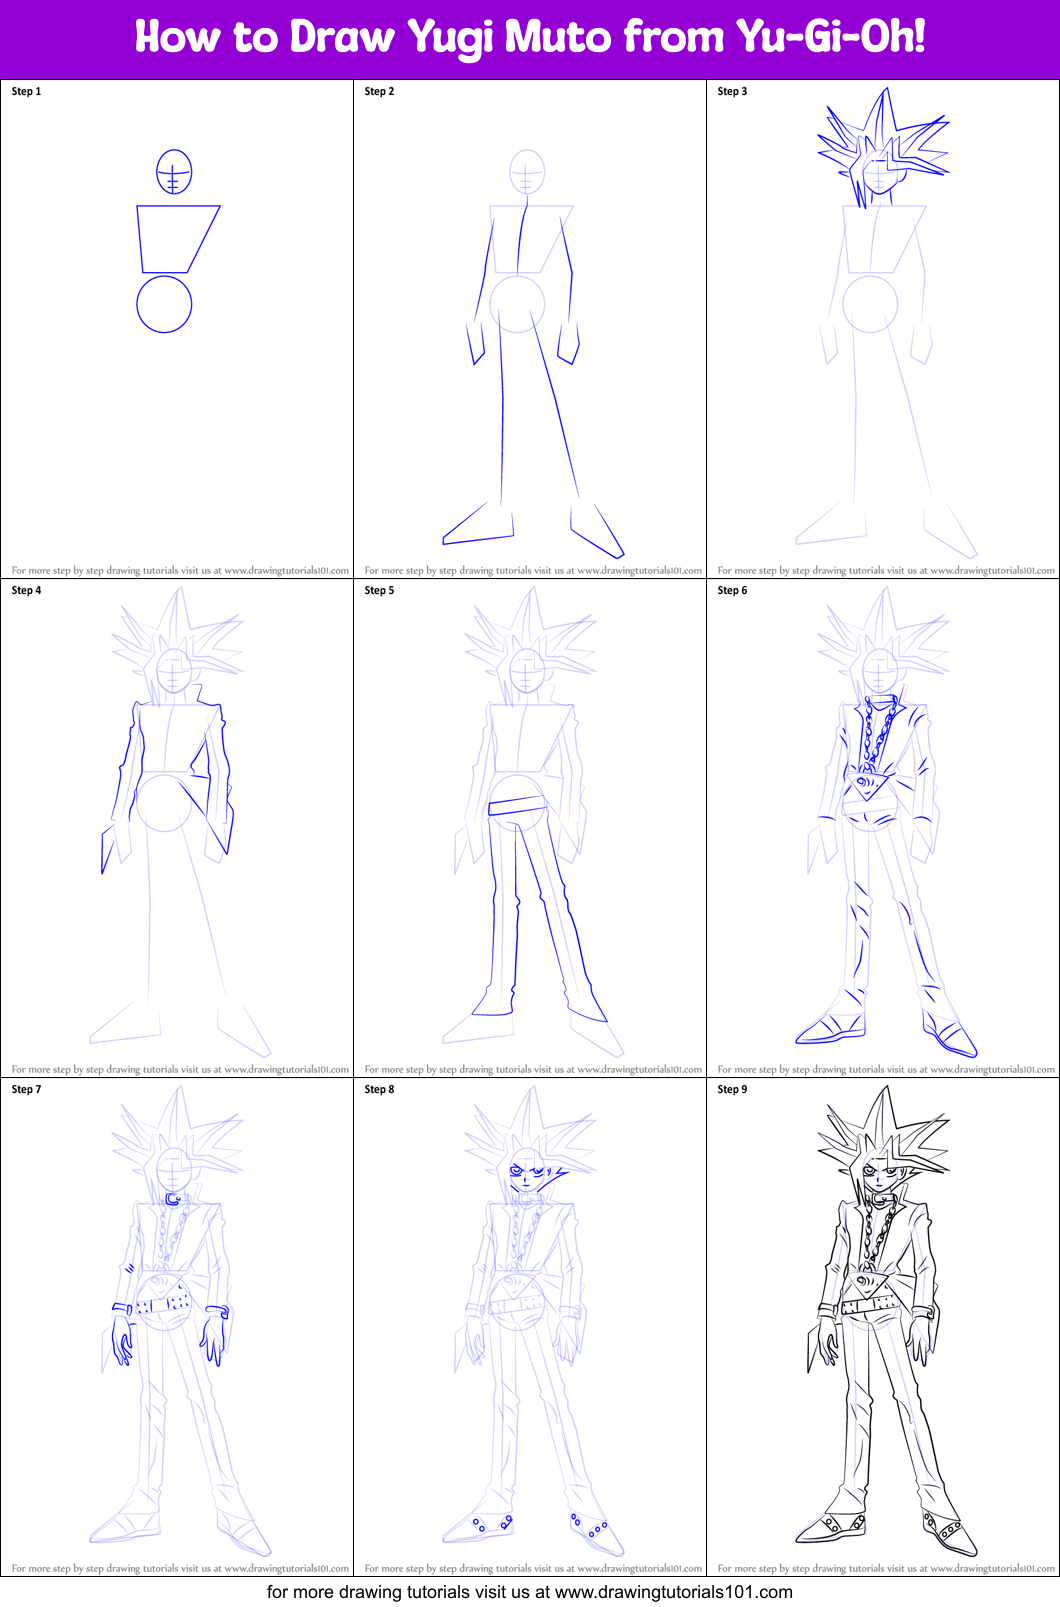 How to Draw Yugi Muto from YuGiOh! printable step by step drawing